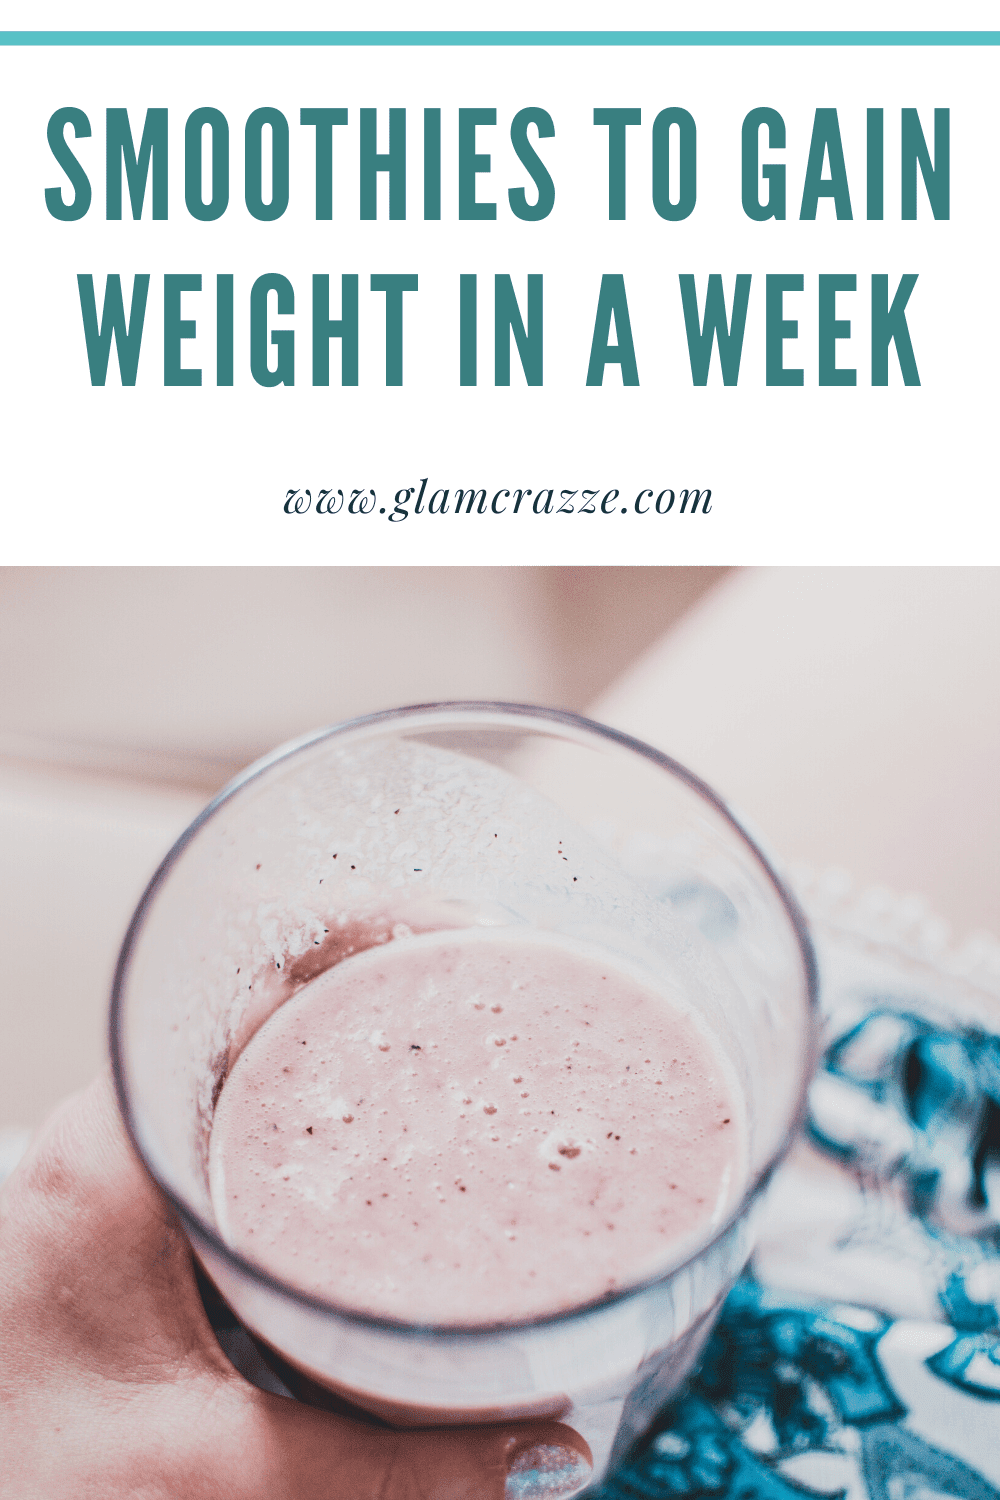 How to gain weight in a week - 10 genuine Tips